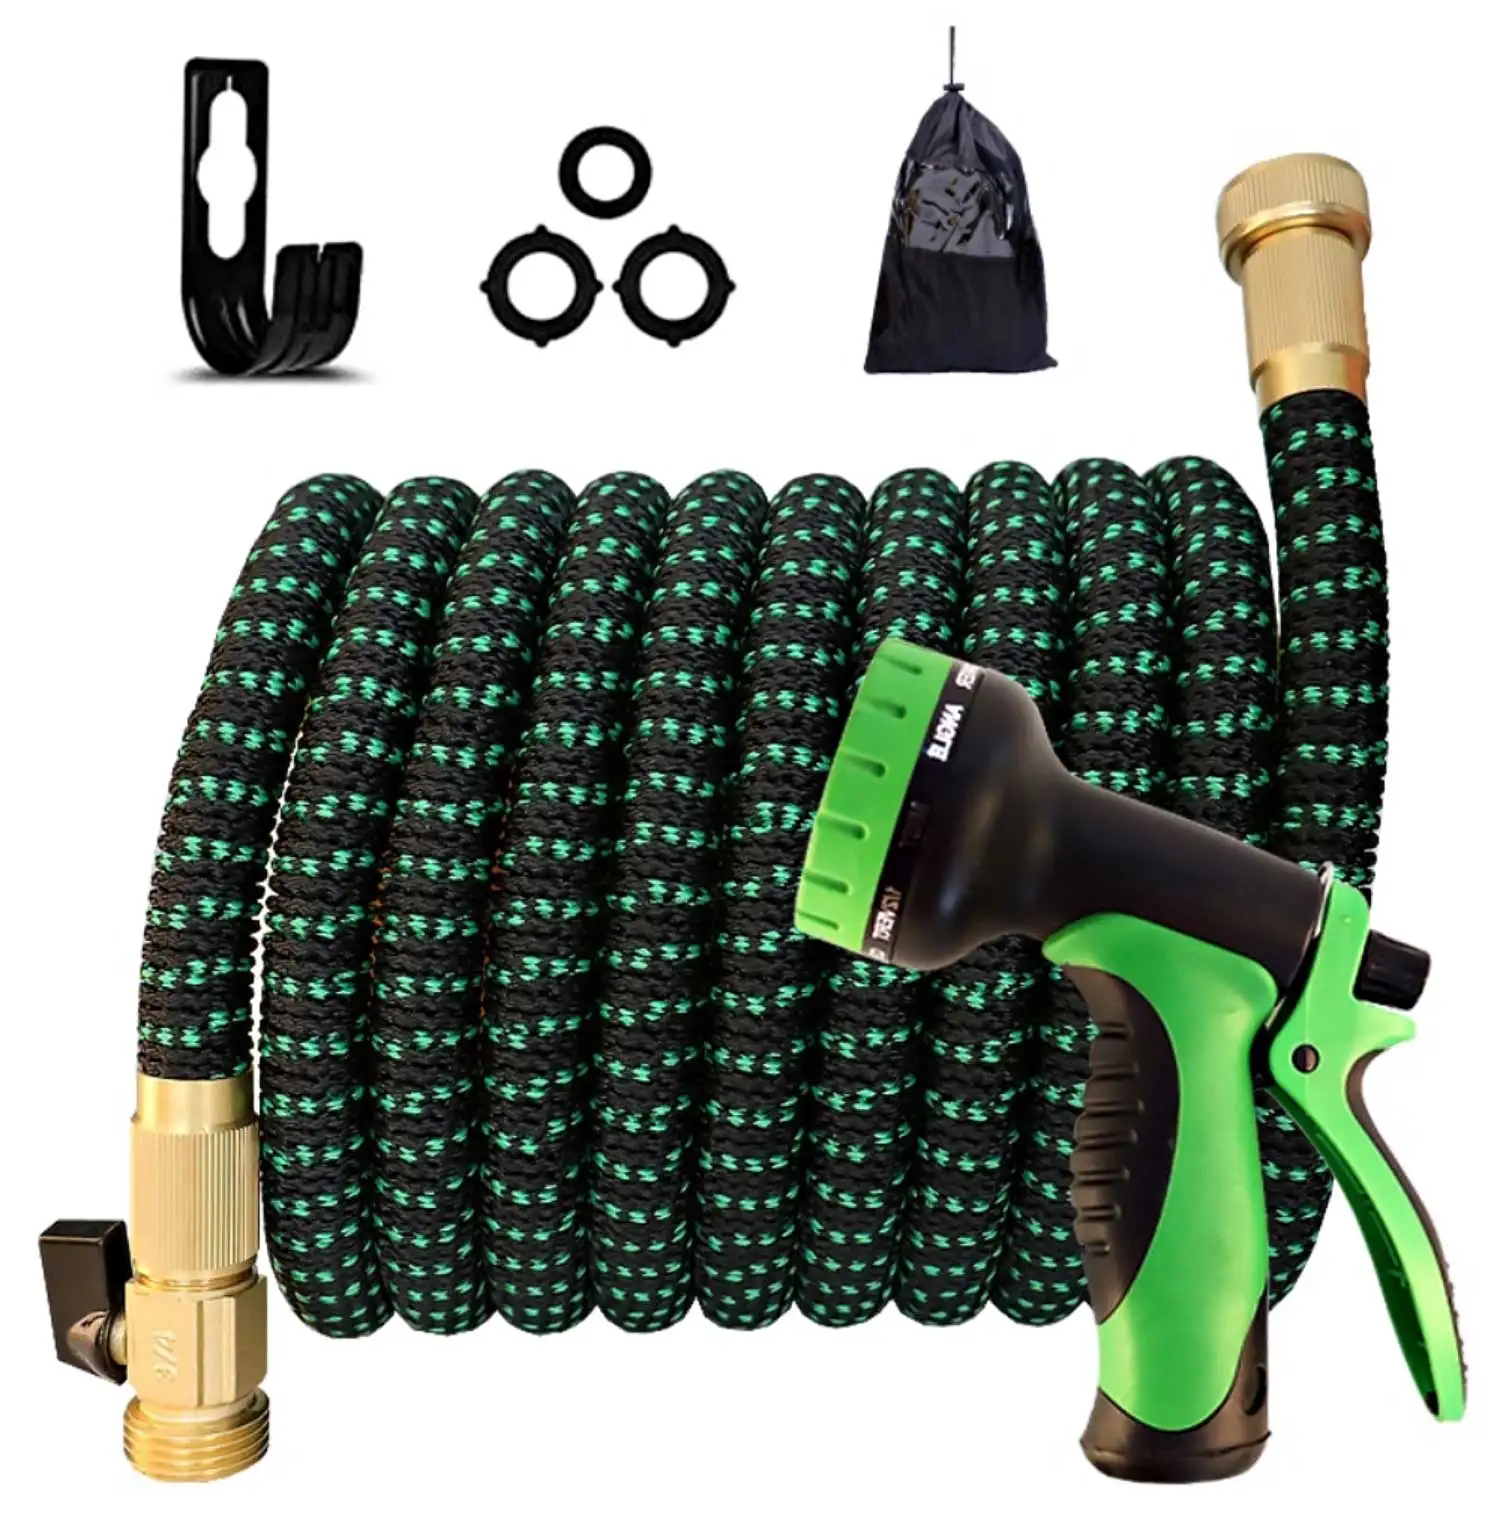 
50-200ft American Expandable Garden Water Hose with 10 Function Spray Nozzle 